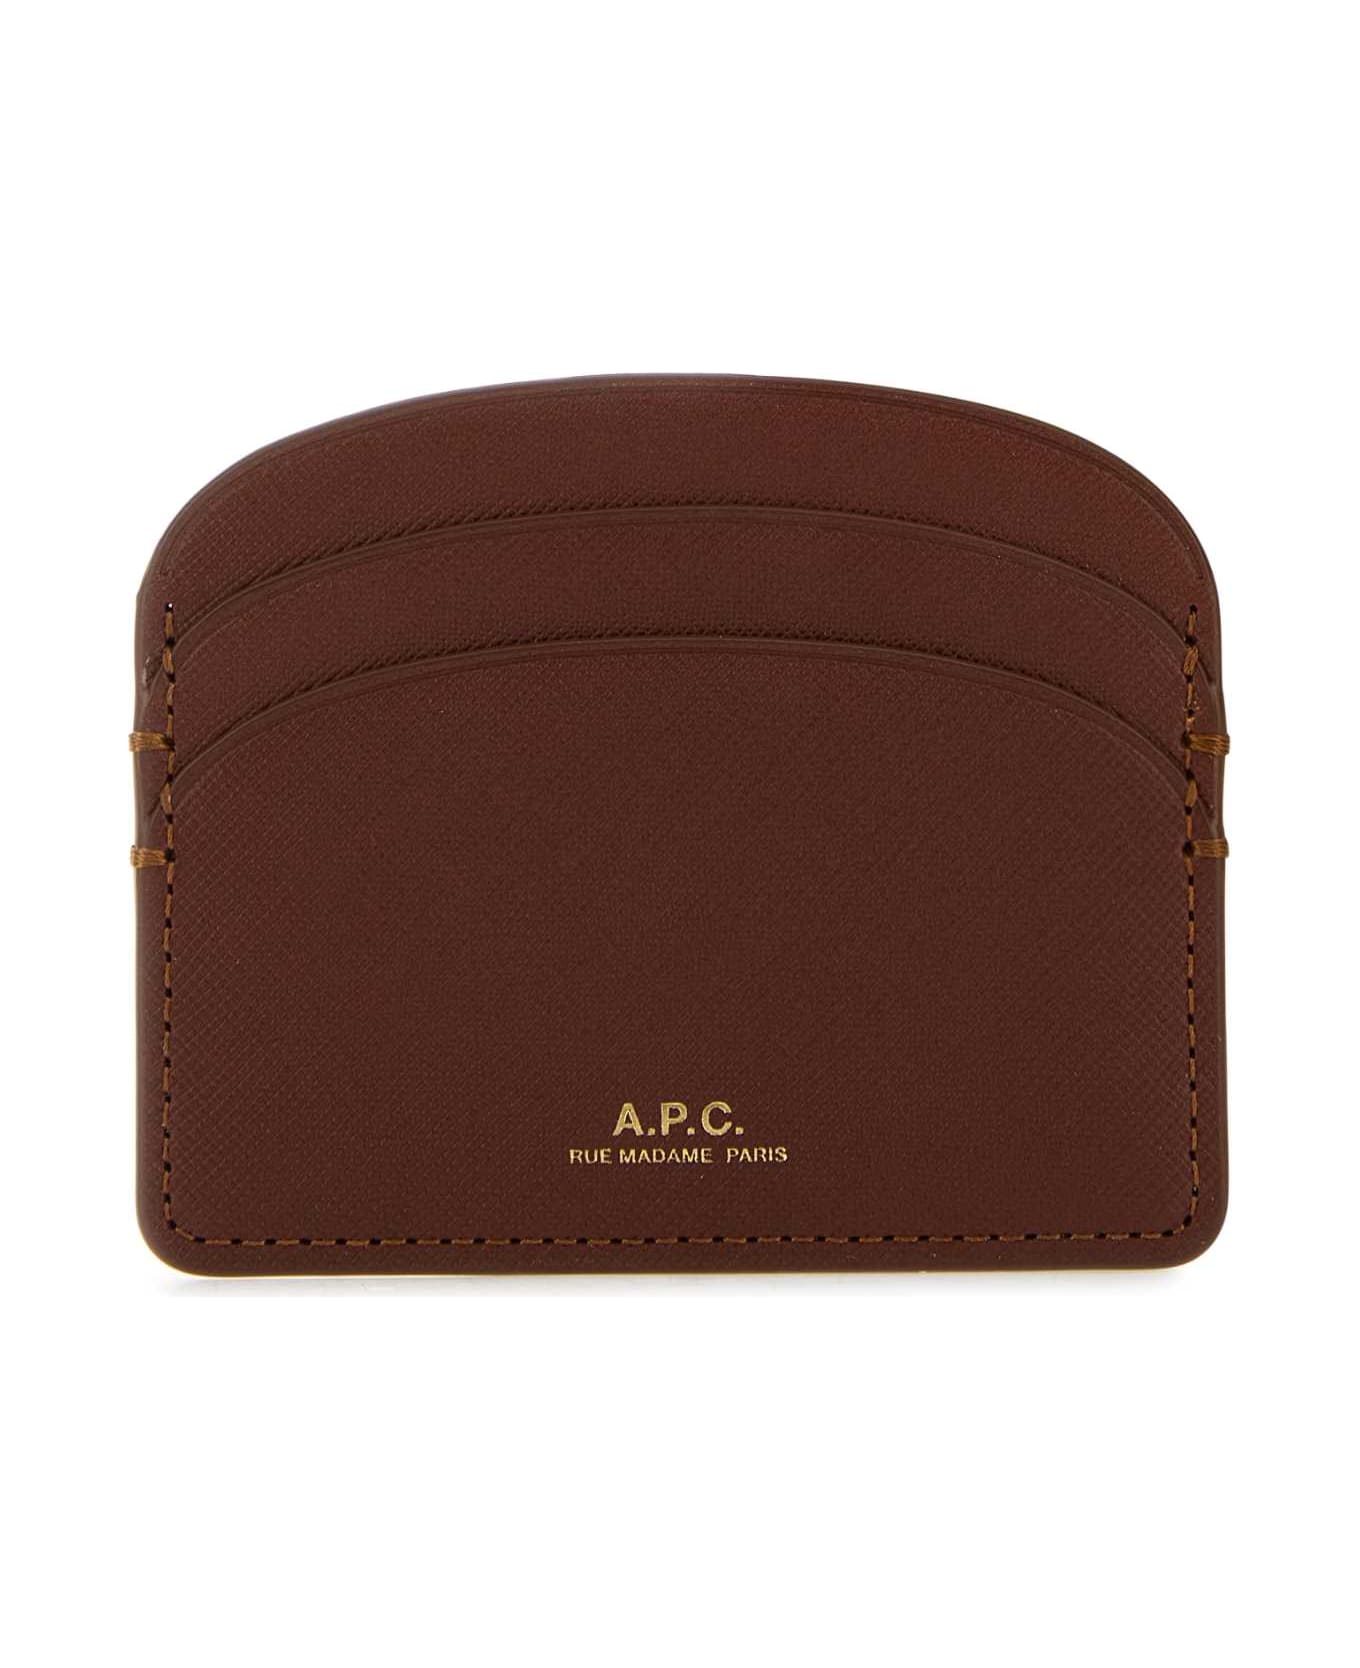 A.P.C. Brown Leather Demi-lune Card Holder - NOISETTE